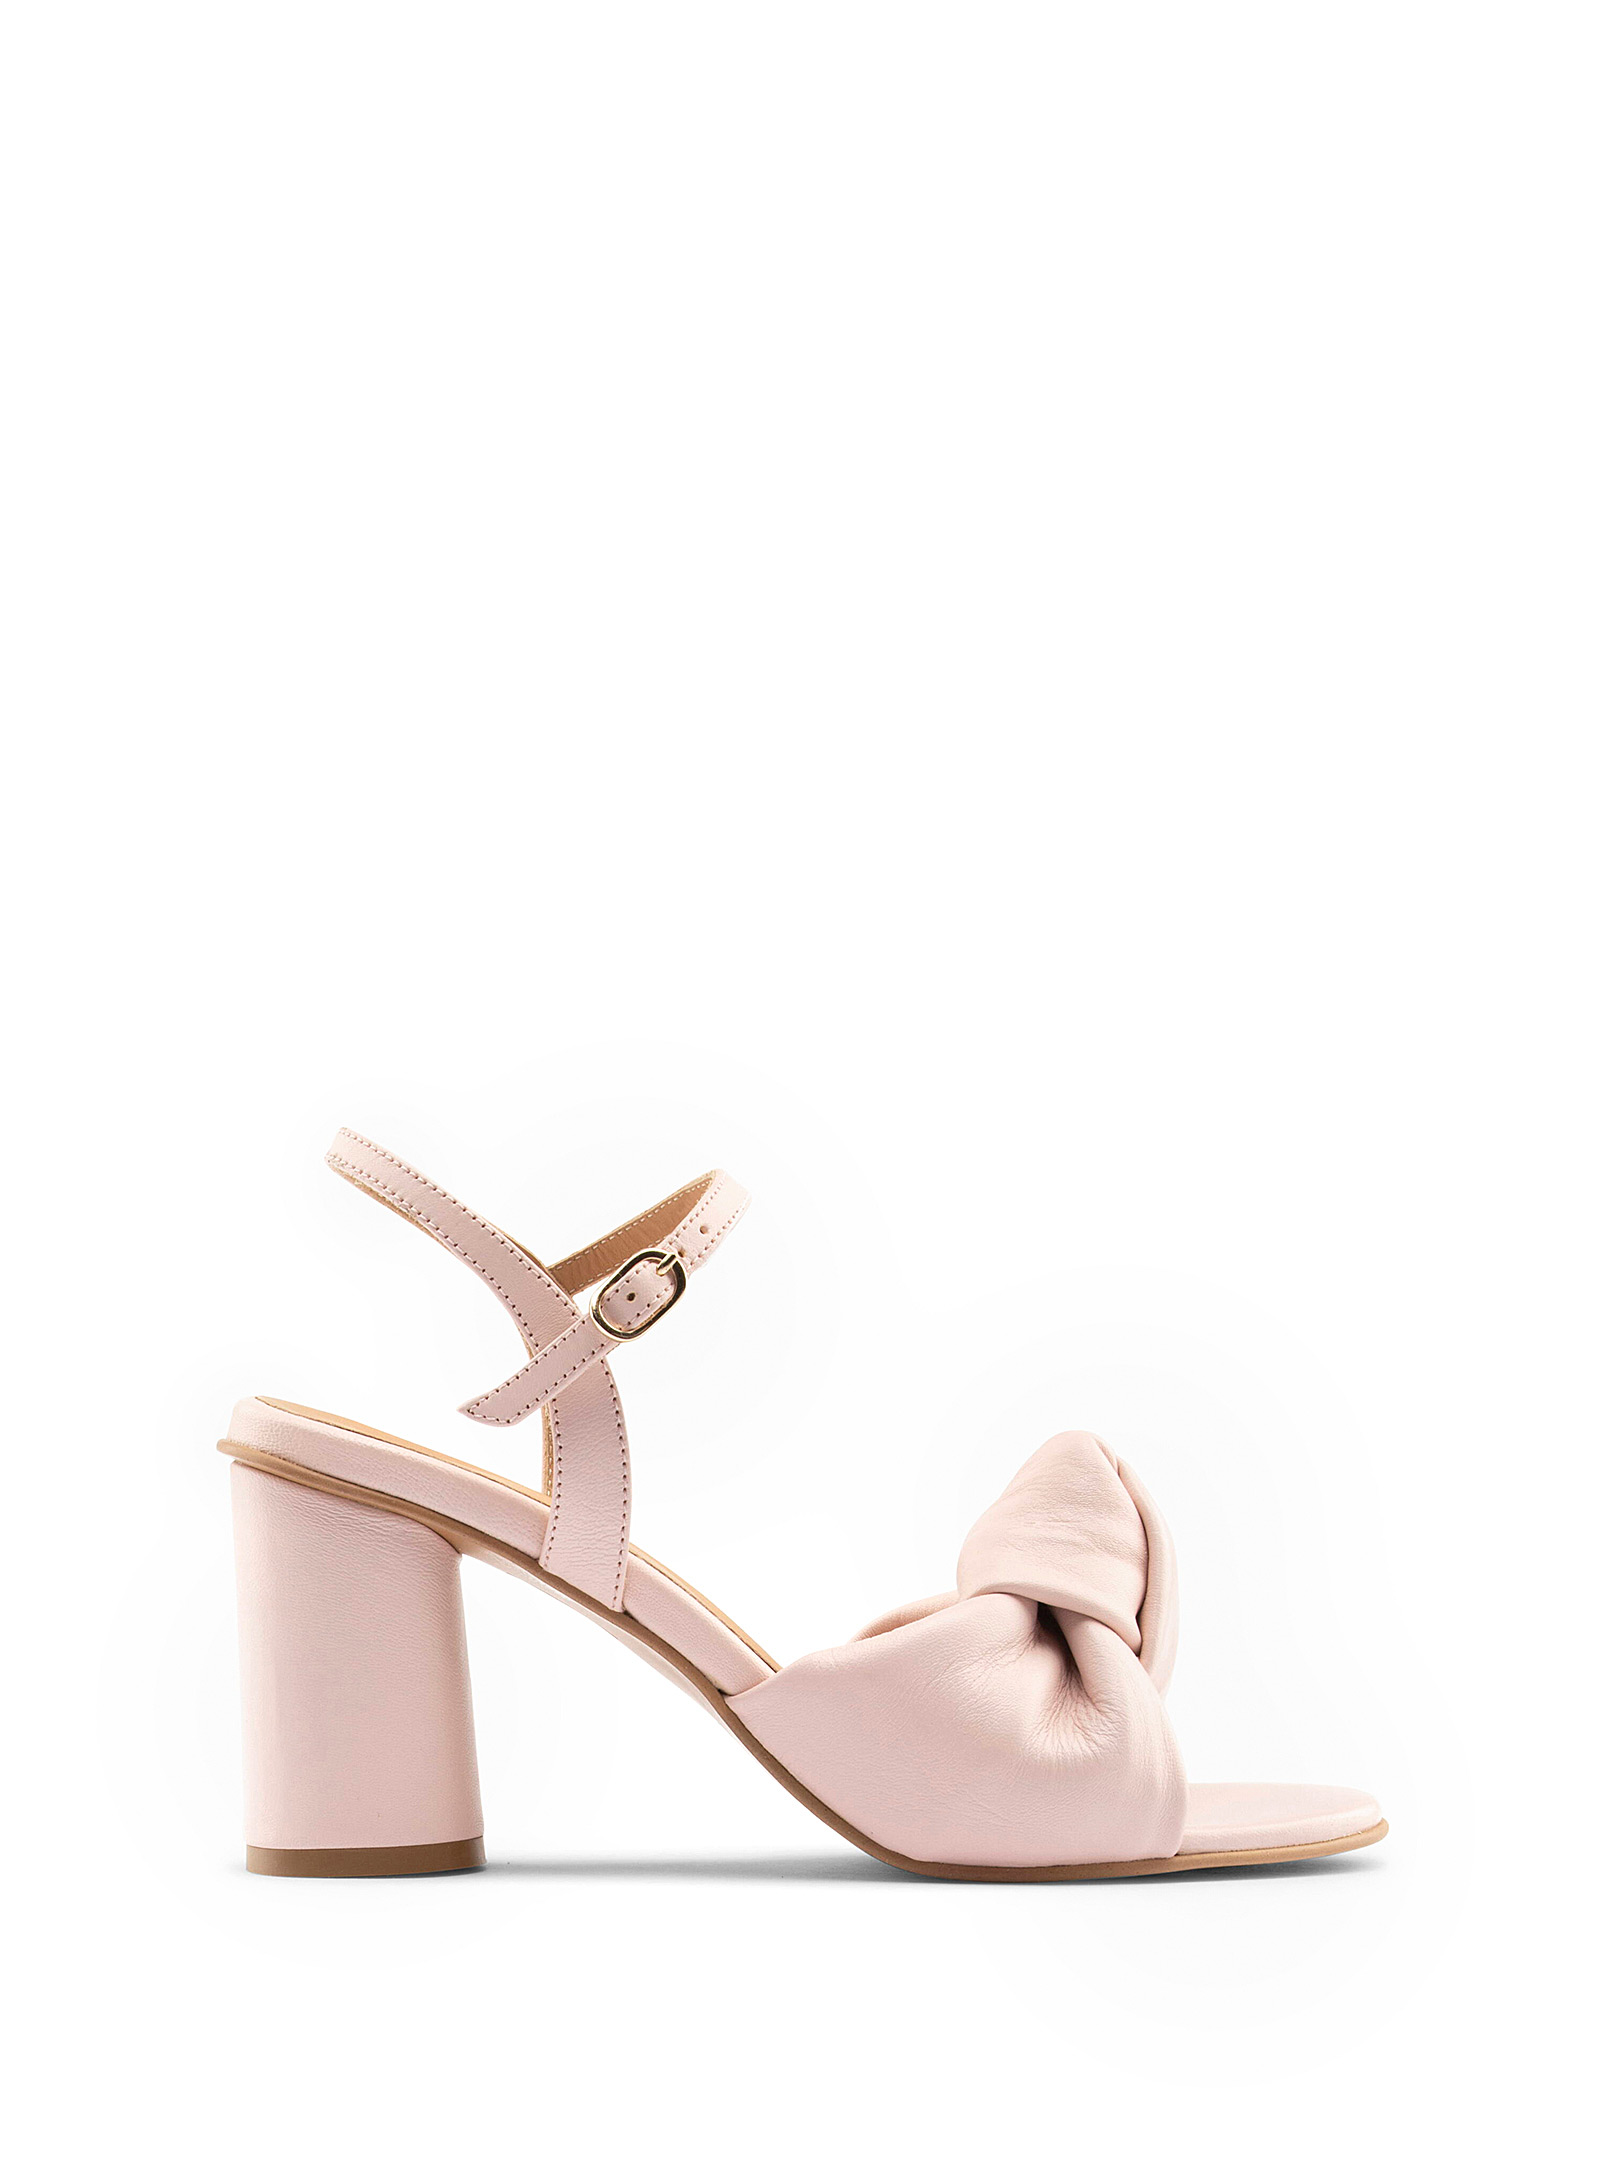 Shop Maguire Noto Block-heel Knotted Sandals Women In Peach